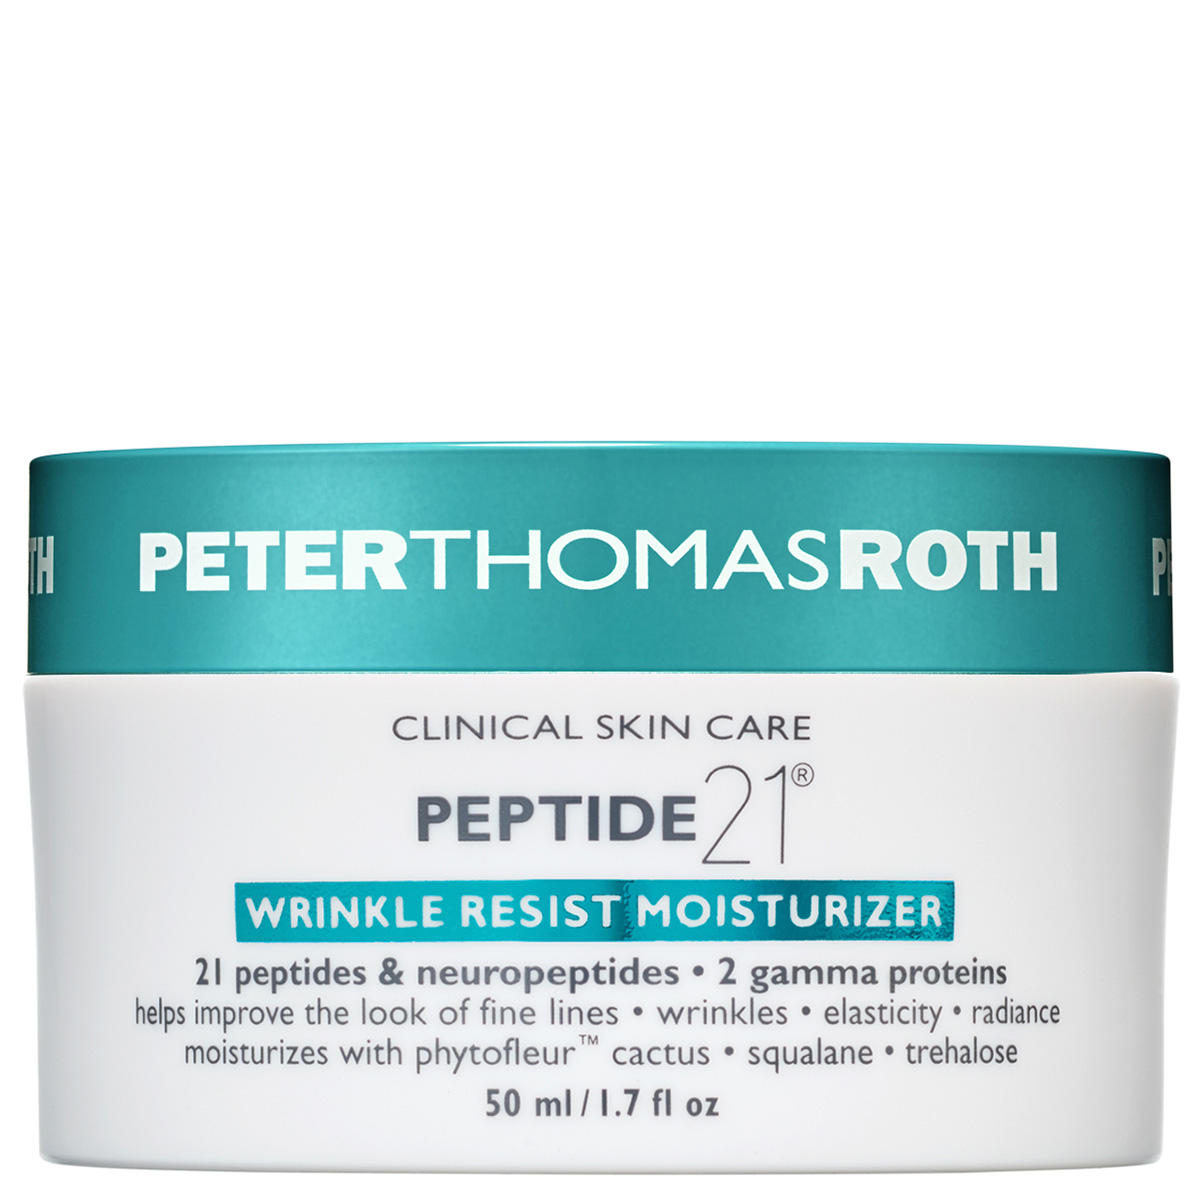 PETER THOMAS ROTH CLINICAL SKIN CARE Peptide 21 Wrinkle Resist Moisturizer 50 ml